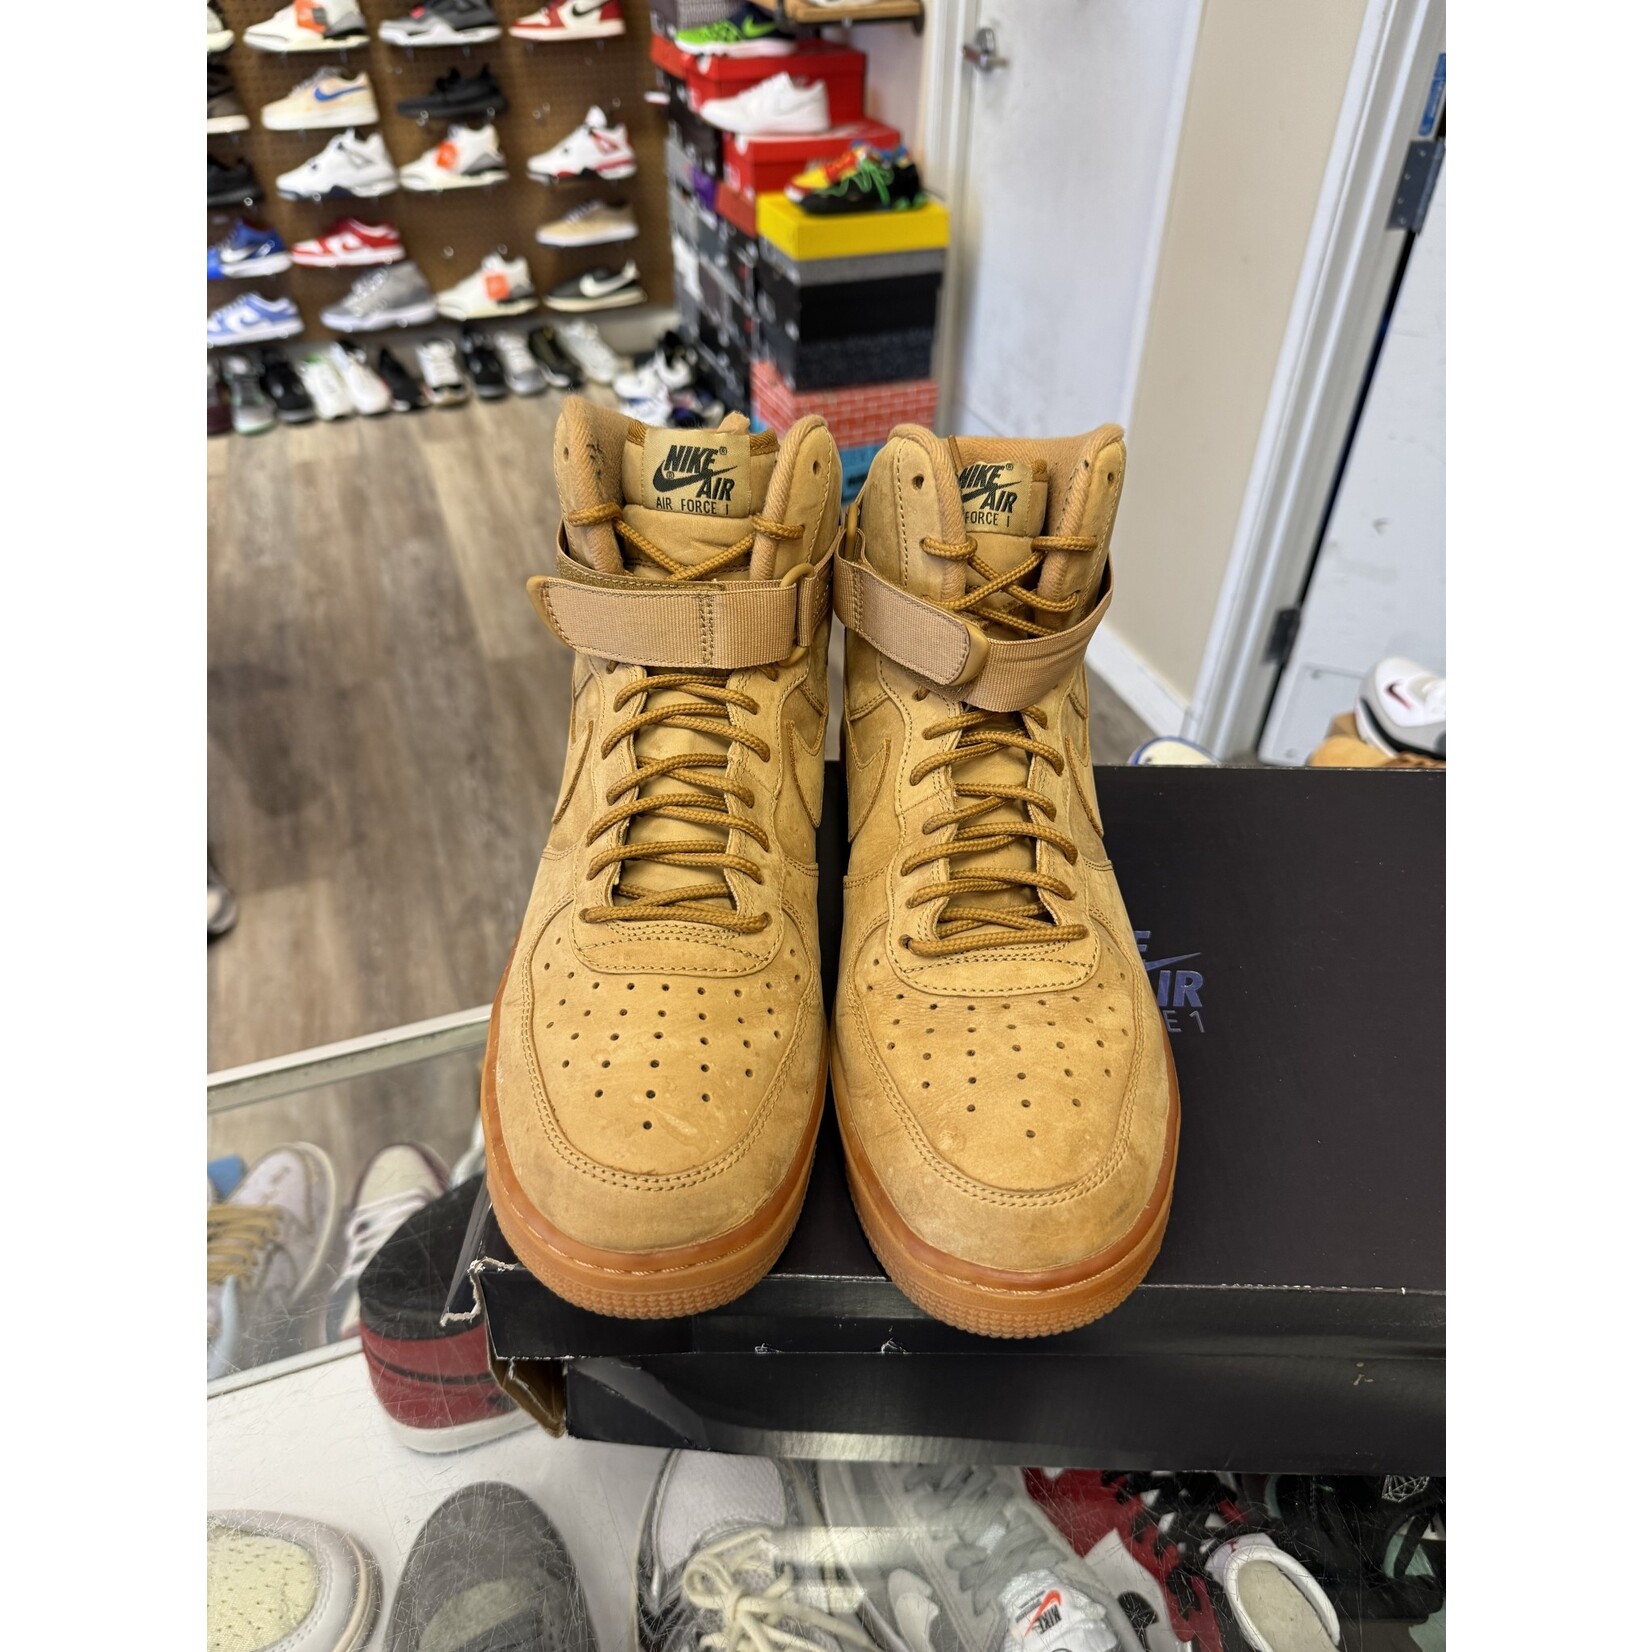 Nike Nike Air Force 1 High Flax (2018) Size 11, PREOWNED